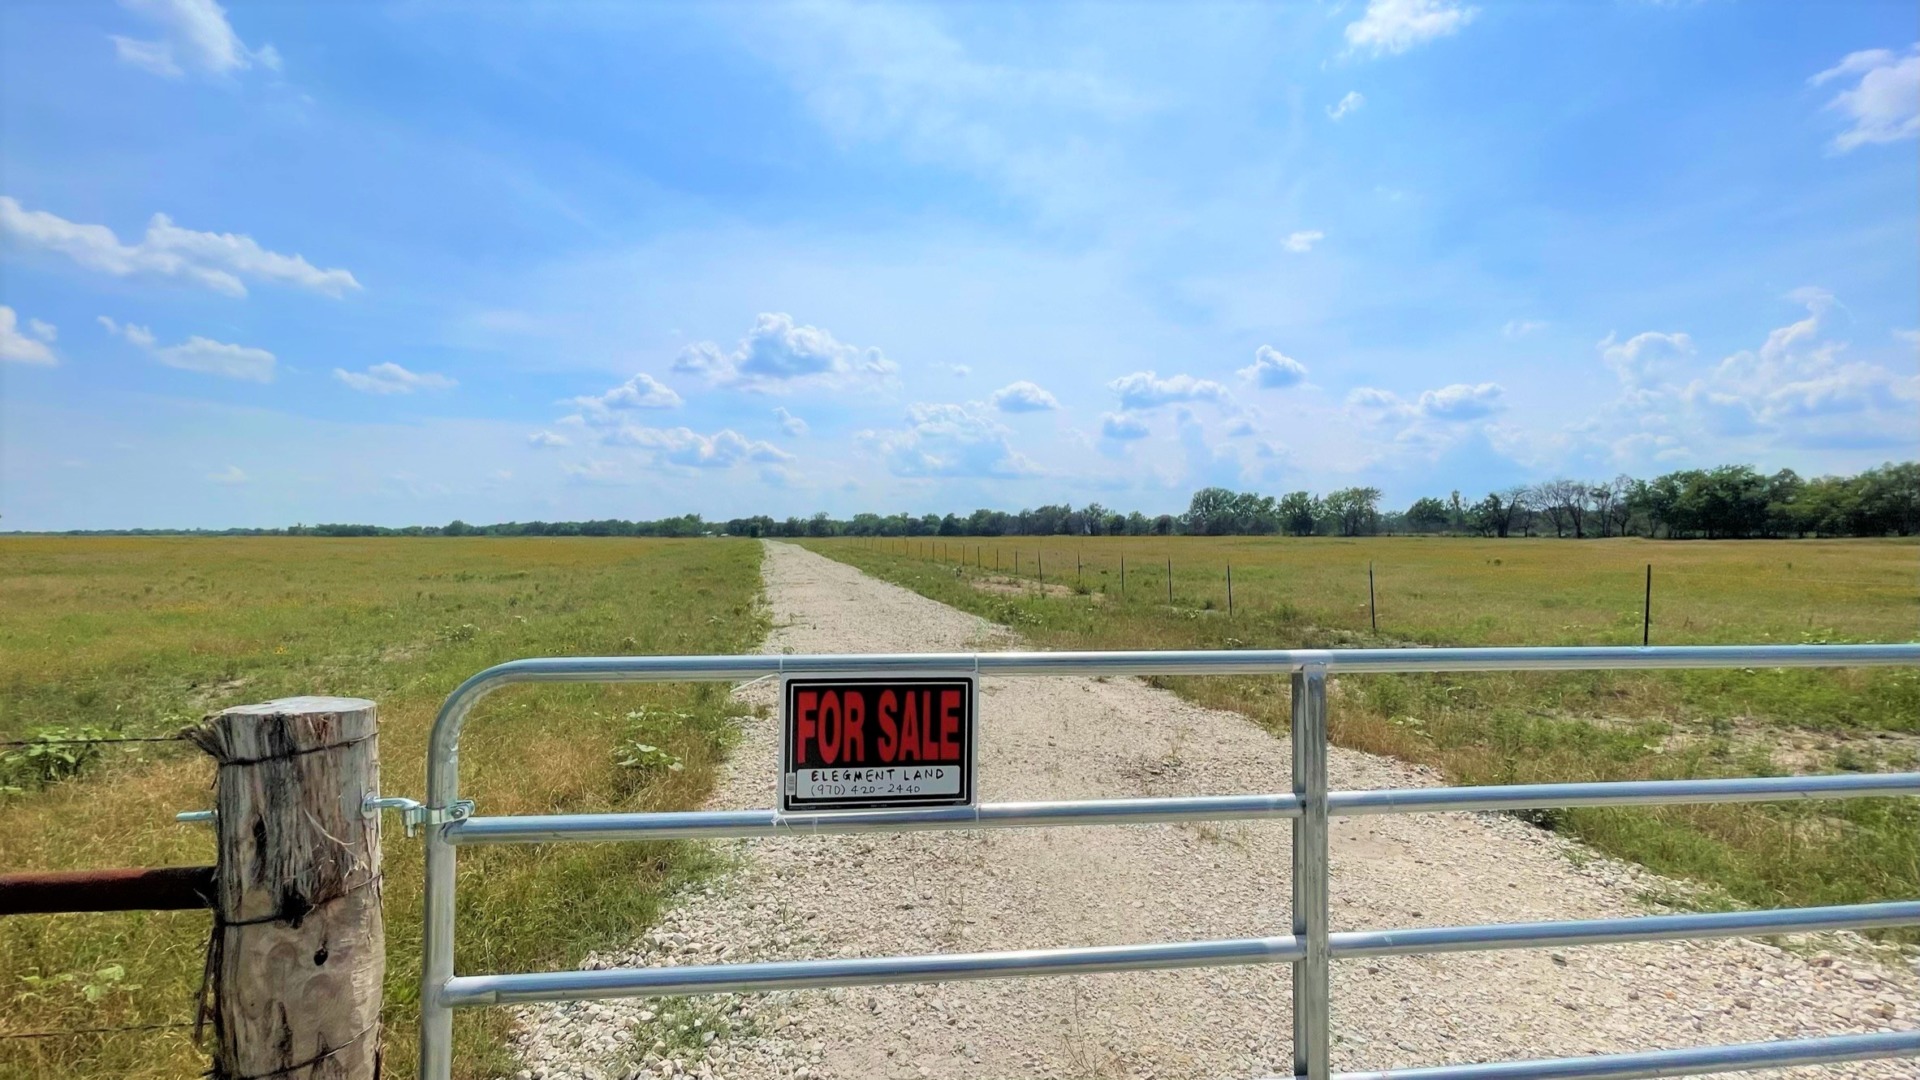 Land for Sale in Limestone County 3.75 Acres with Road Front, Drainage, Gate Entry & Power / Water. Perc Tested